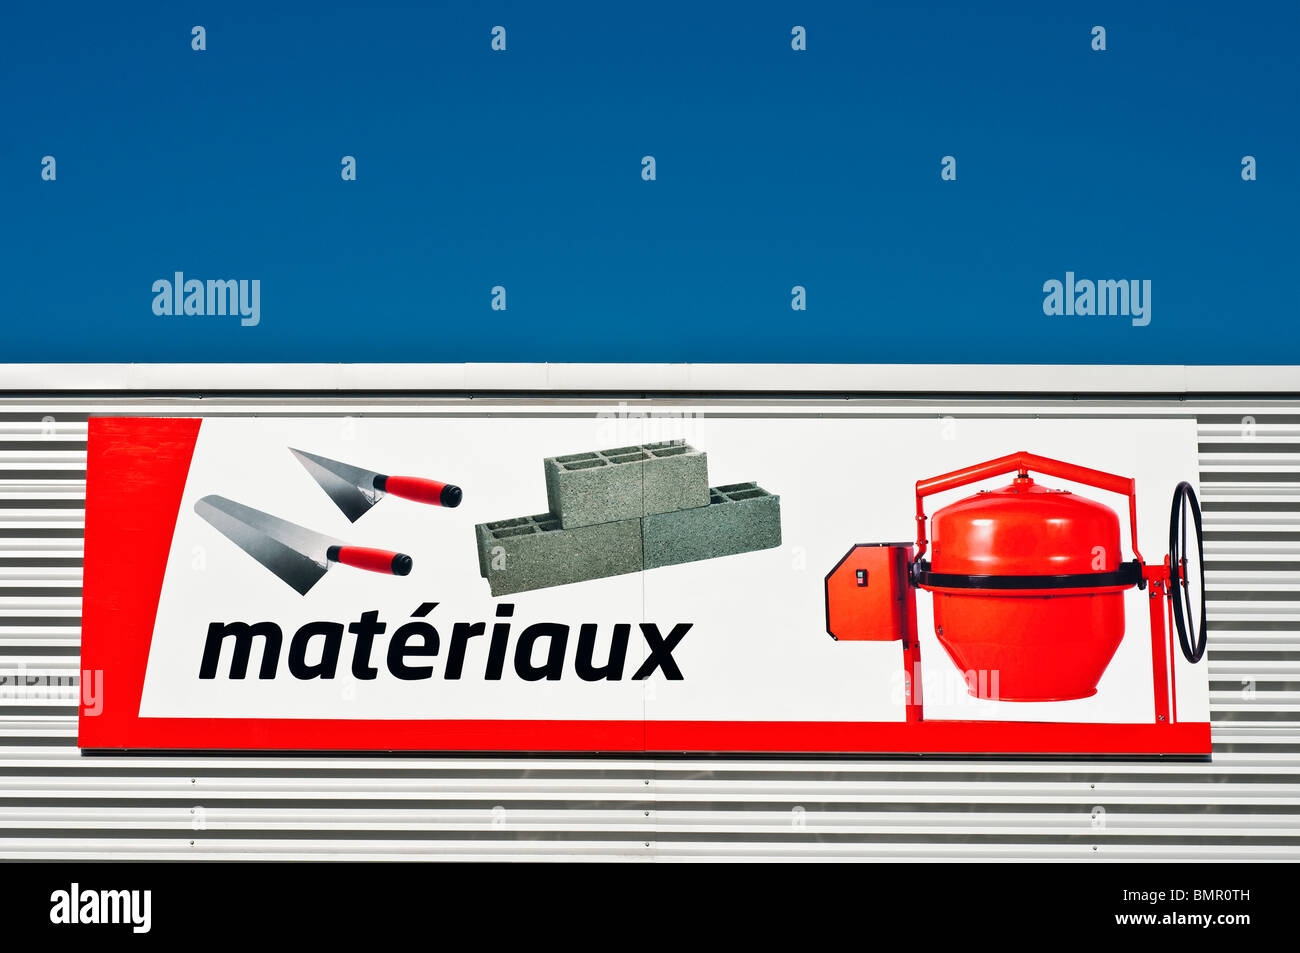 Bricomarché D-I-Y store 'matériaux' supplies advertising sign, France. Stock Photo